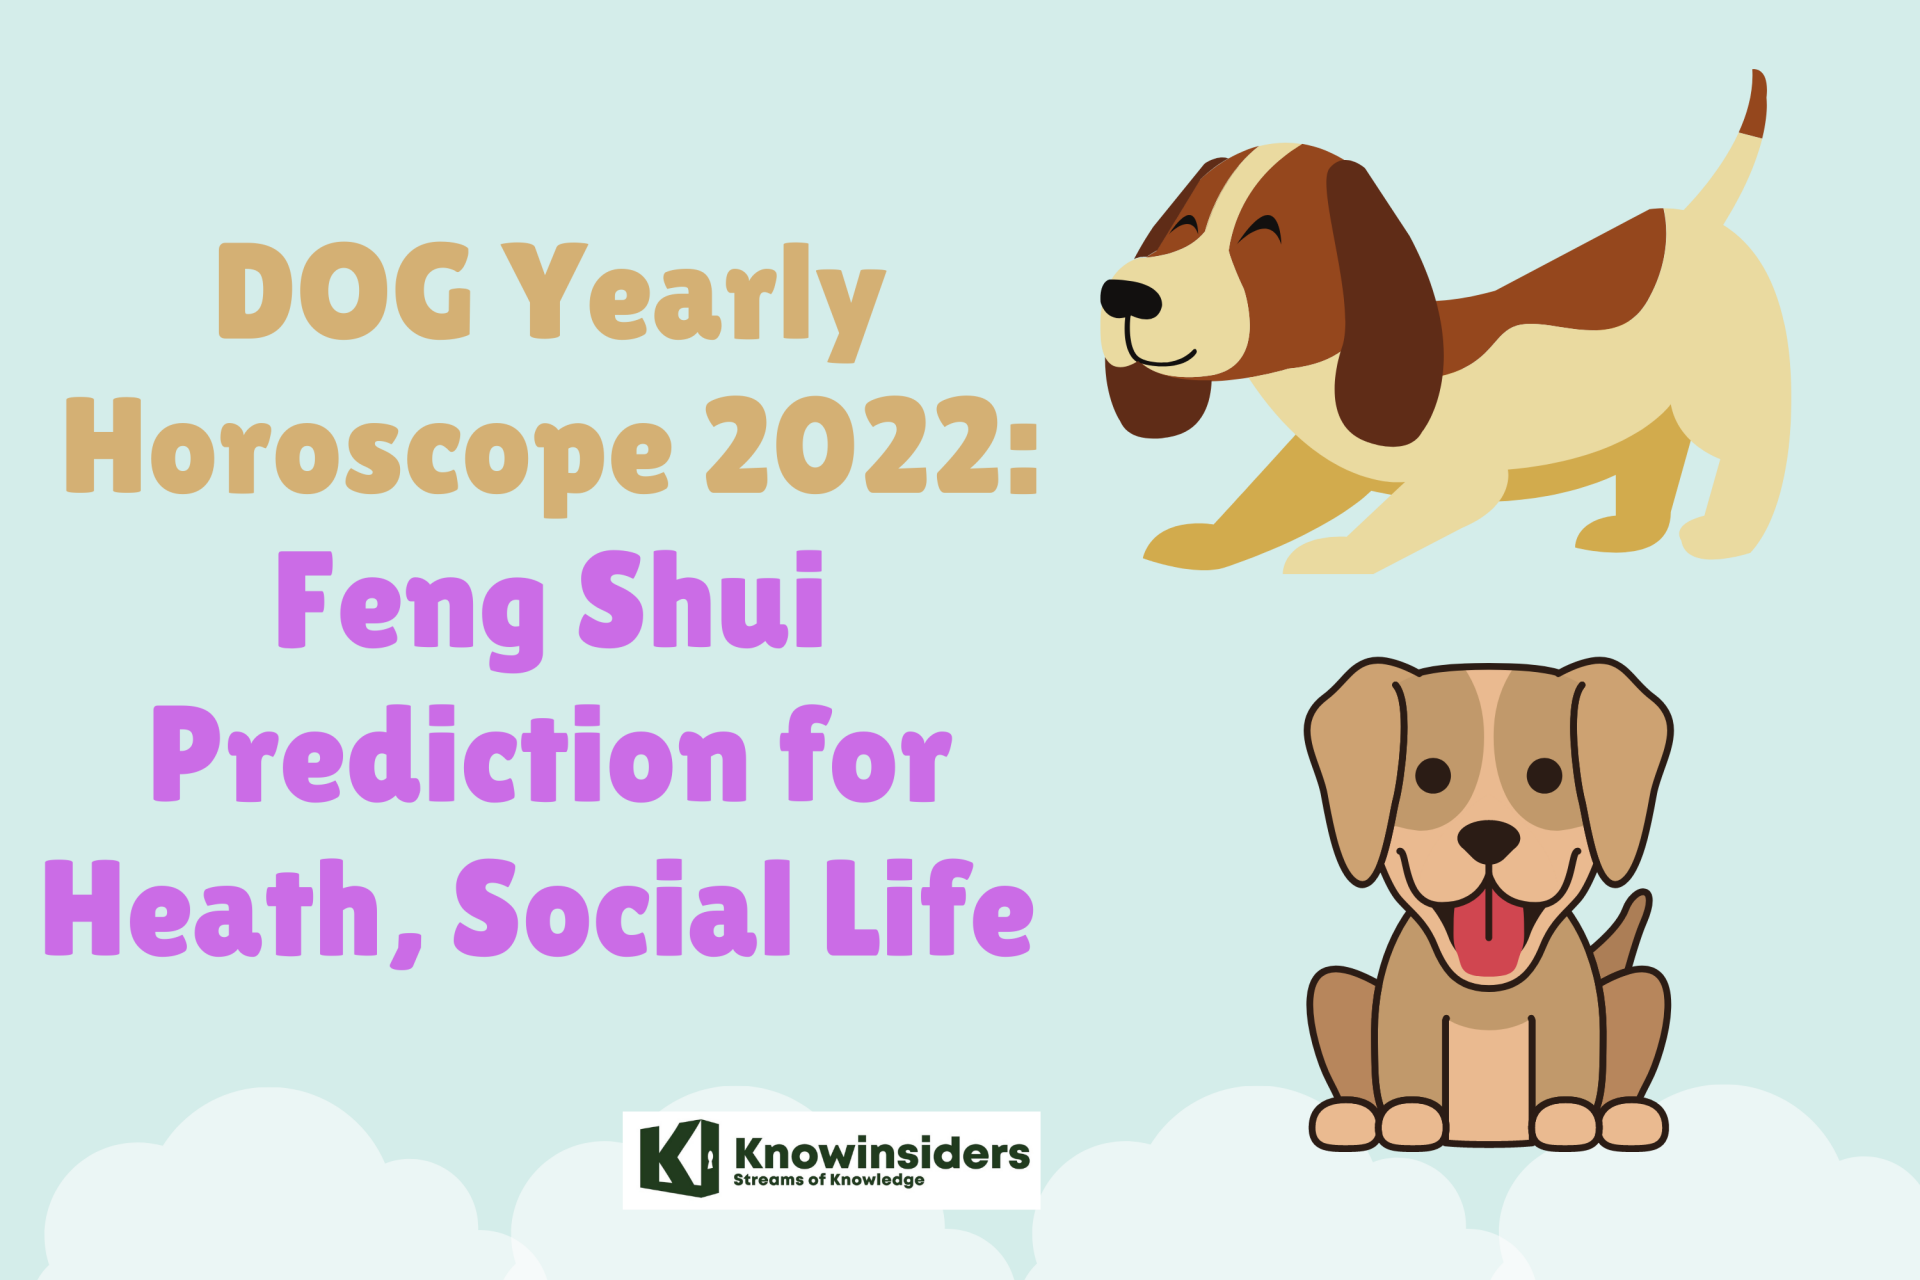 DOG Yearly Horoscope 2022 – Feng Shui Prediction for Health, Social Life